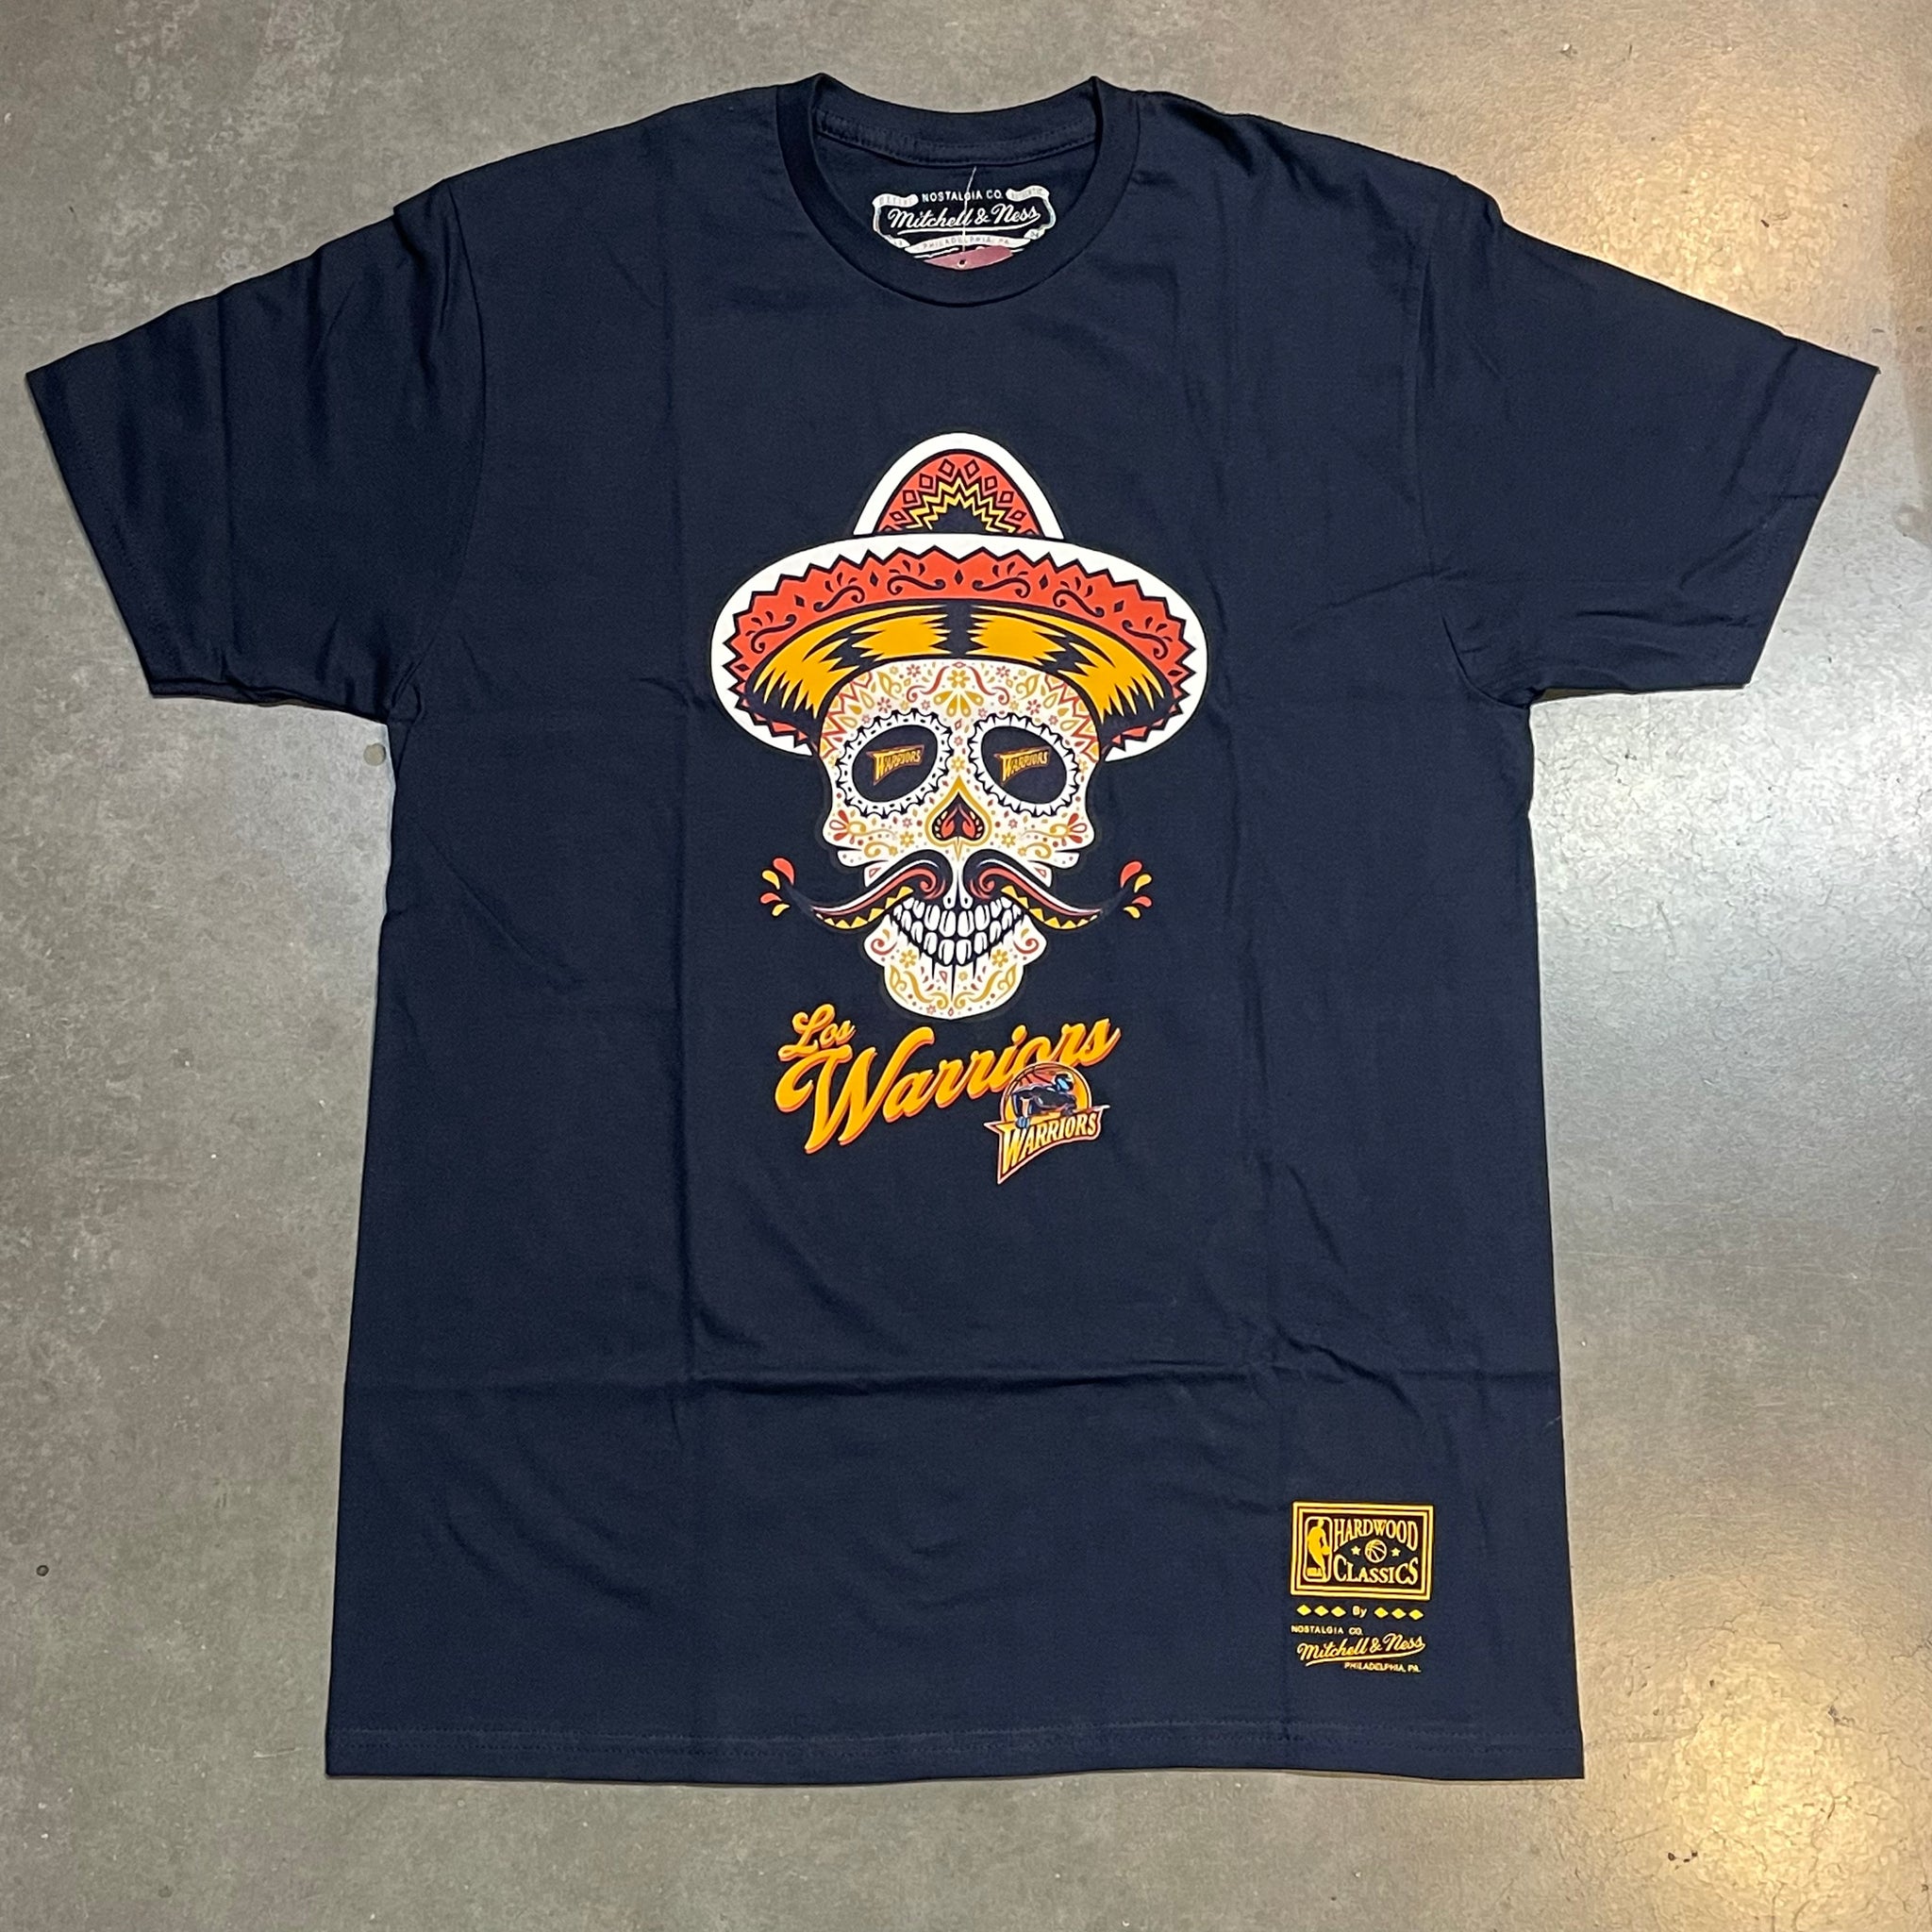 Golden State Warriors "Ofrenda' Day of the Dead Tee